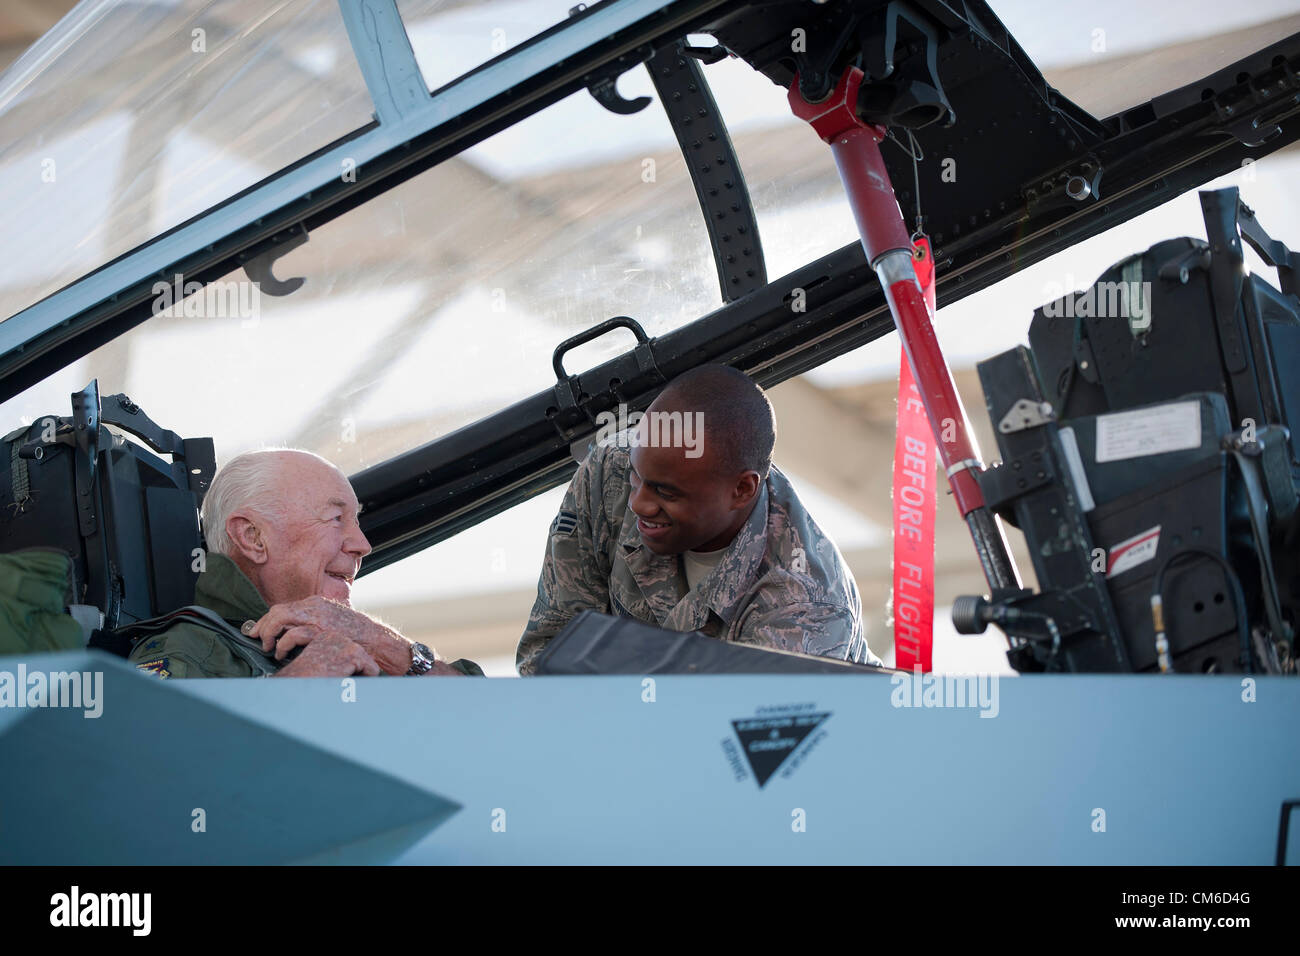 Retired United States Air Force Brig. Gen. Chuck Yeager, 89, is assisted in the cockpit of an F-15D Eagle by Senior Airman Anthony Ewin before taking off to celebrate the 65th anniversary of becoming the first person to break the sound barrier October 14, 2012, at Nellis Air Force Base, Nevada. In 1947 Yeager broke the sound barrier in a Bell XS-1 rocket research plane named Glamorous Glennis. Stock Photo